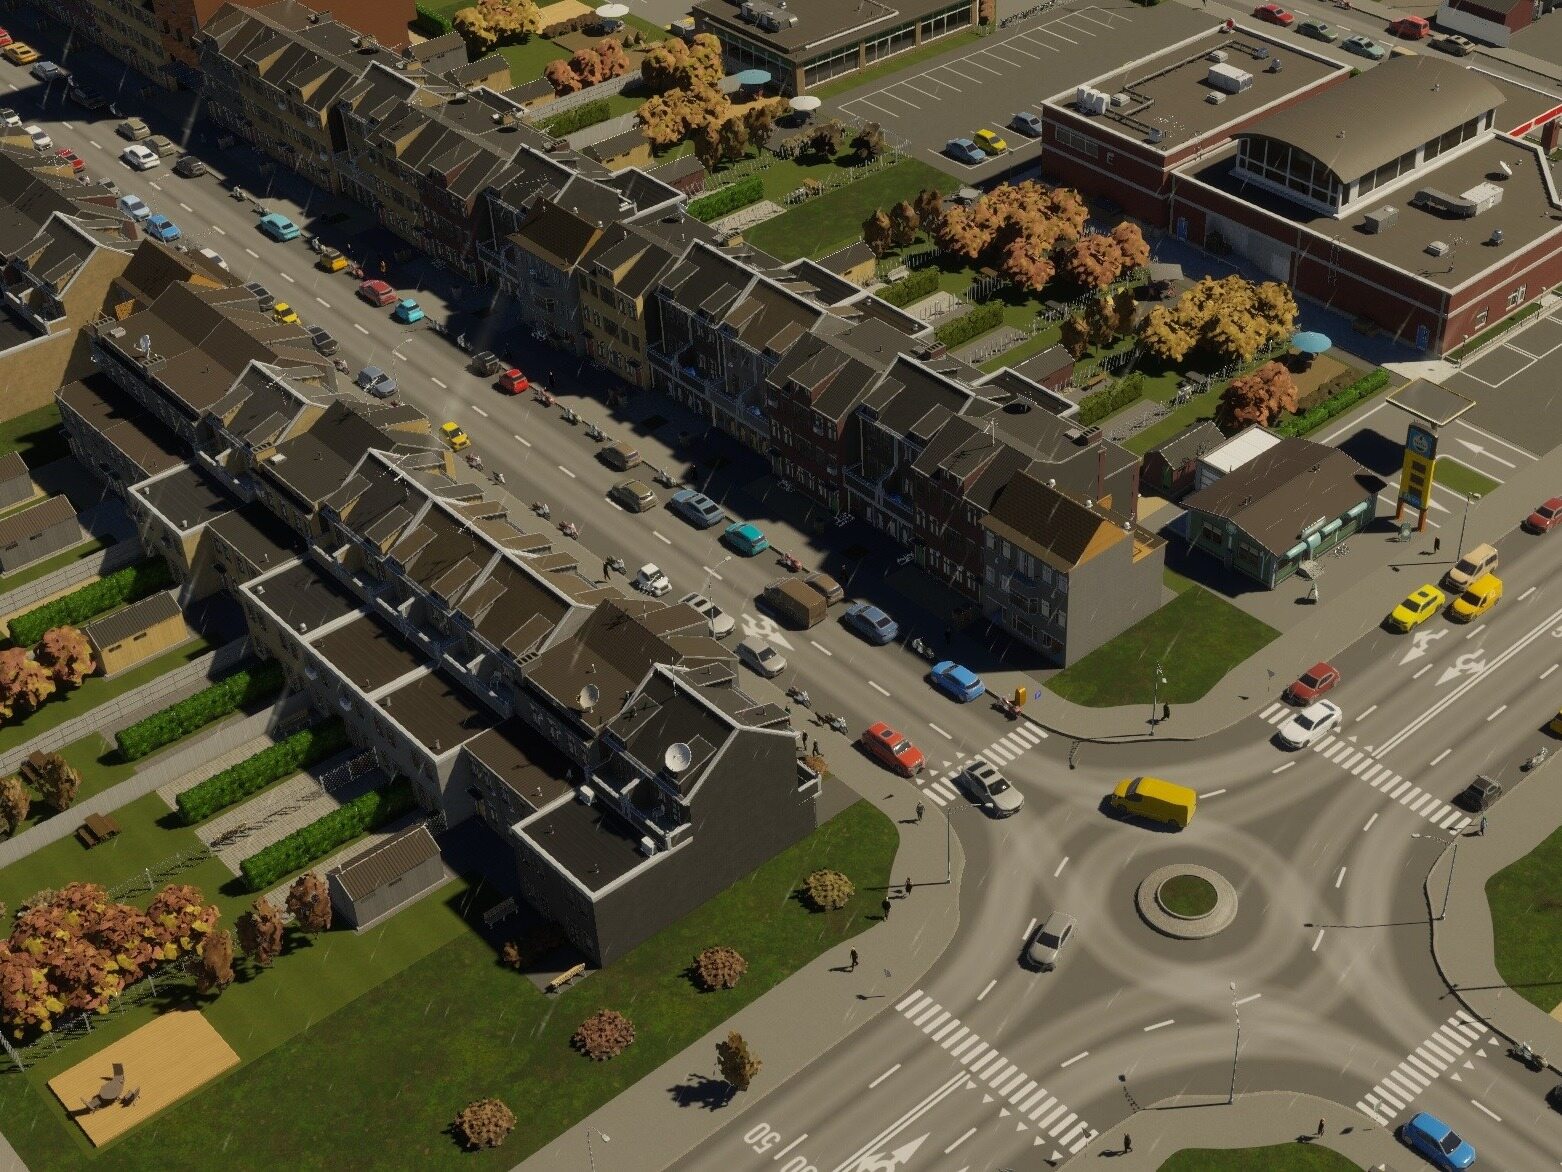 New quality or reheated cutlet?  I played Cities: Skylines 2